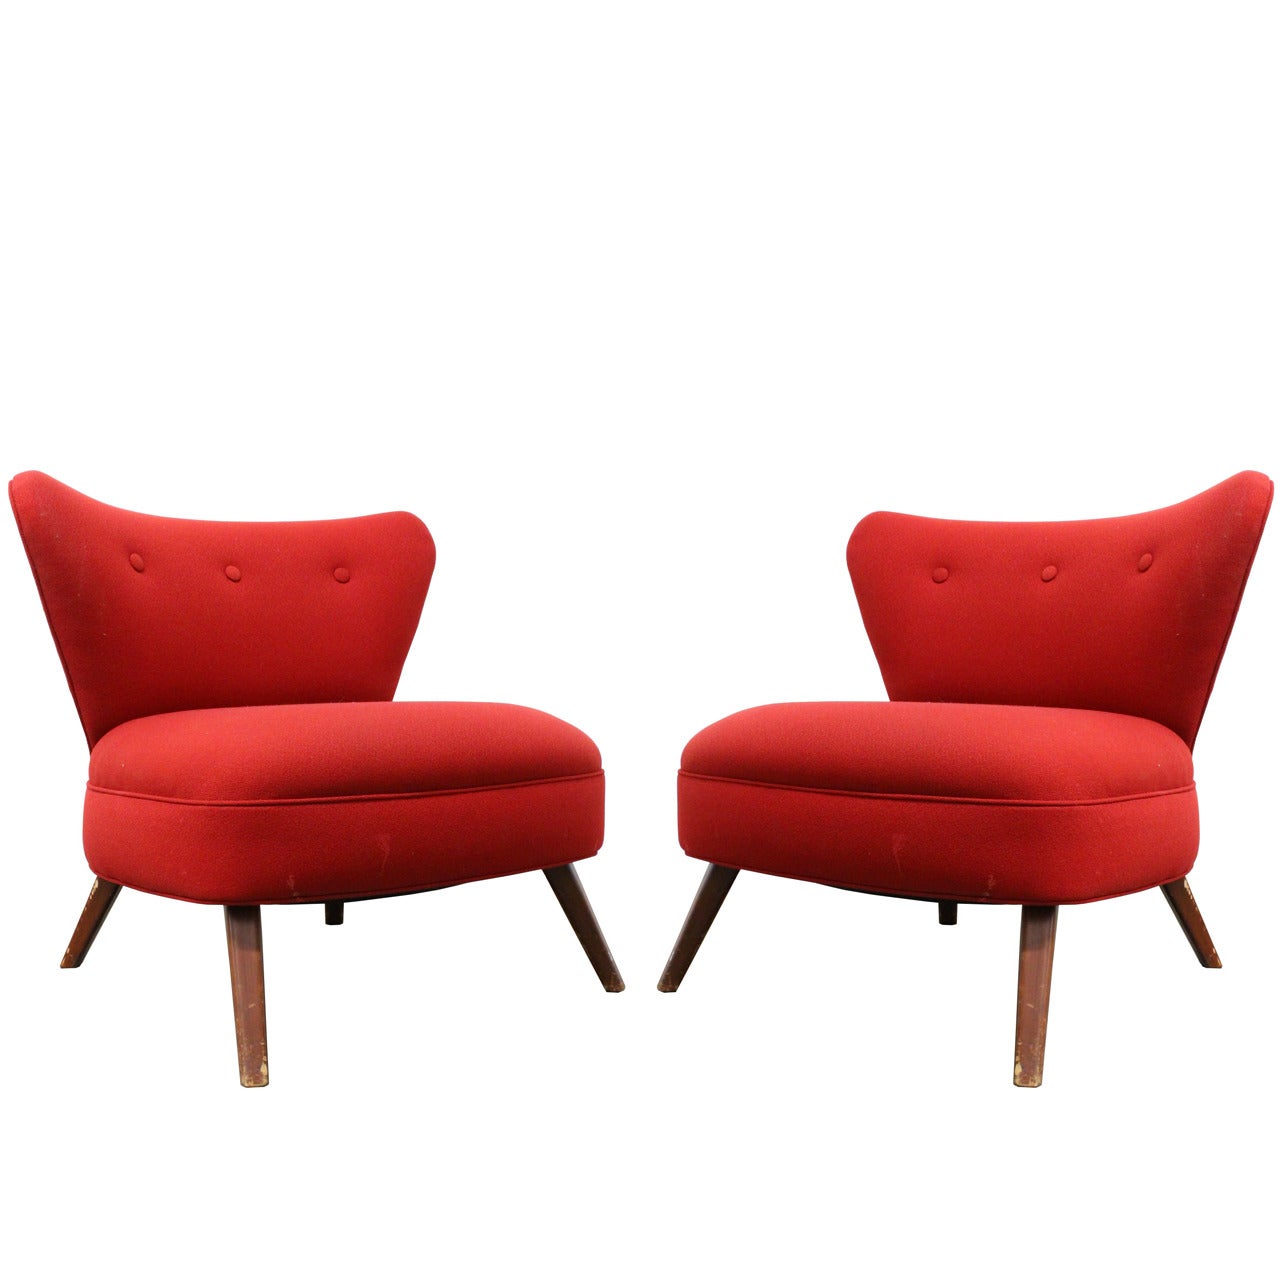 Pair of 1940s Red Wingback Slipper Chairs in the Style of Gilbert Rohde